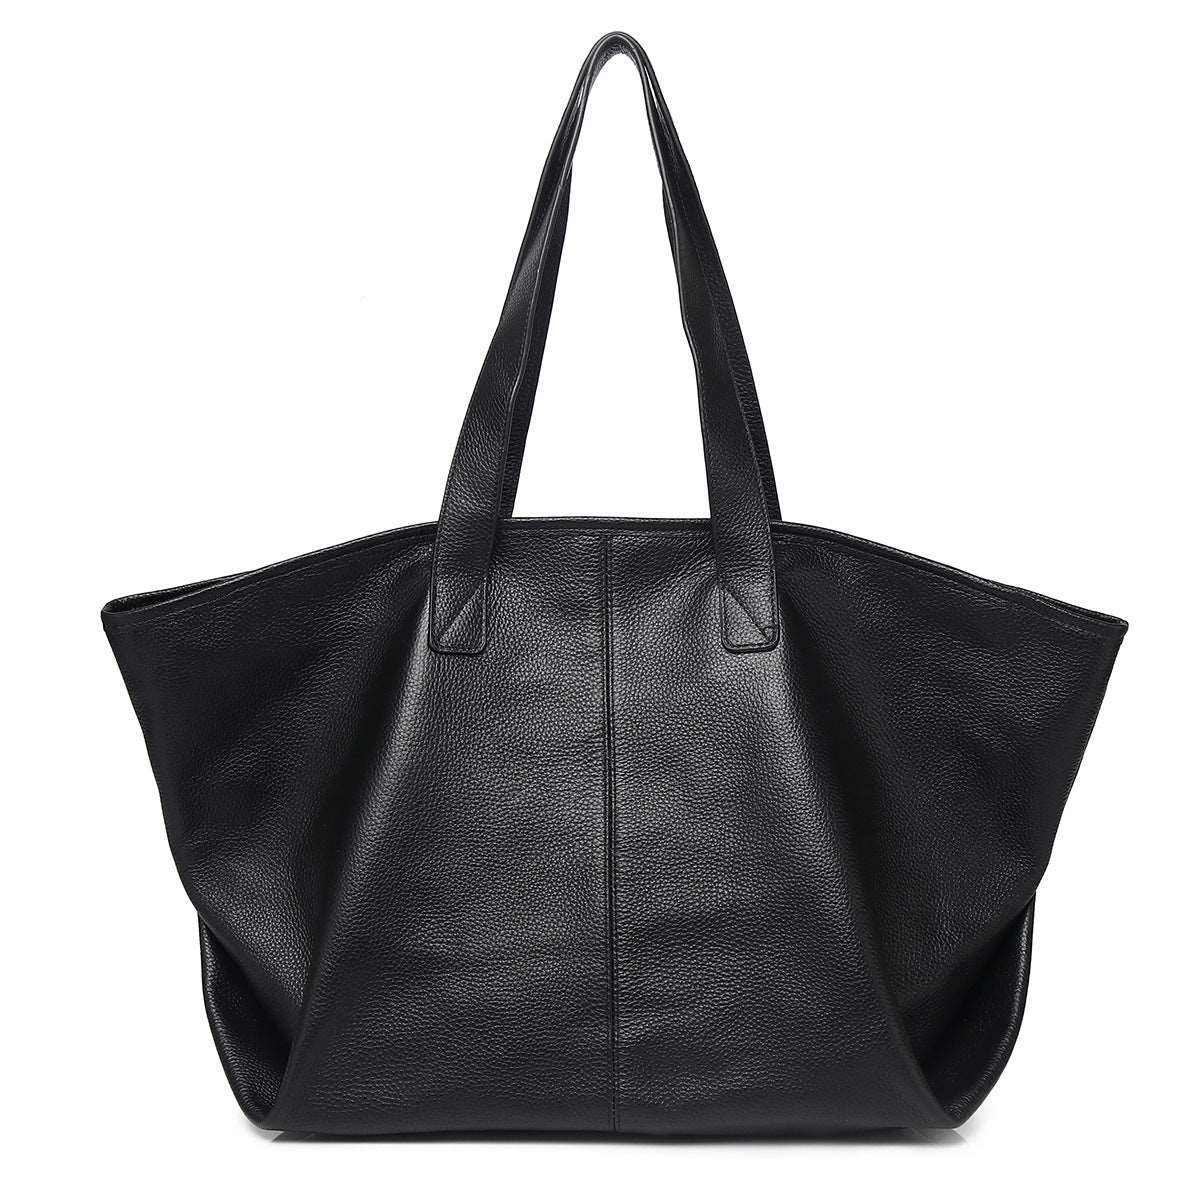 Sleek and Chic Women's Shoulder Bag in Black Leather with Ample Storage woyaza